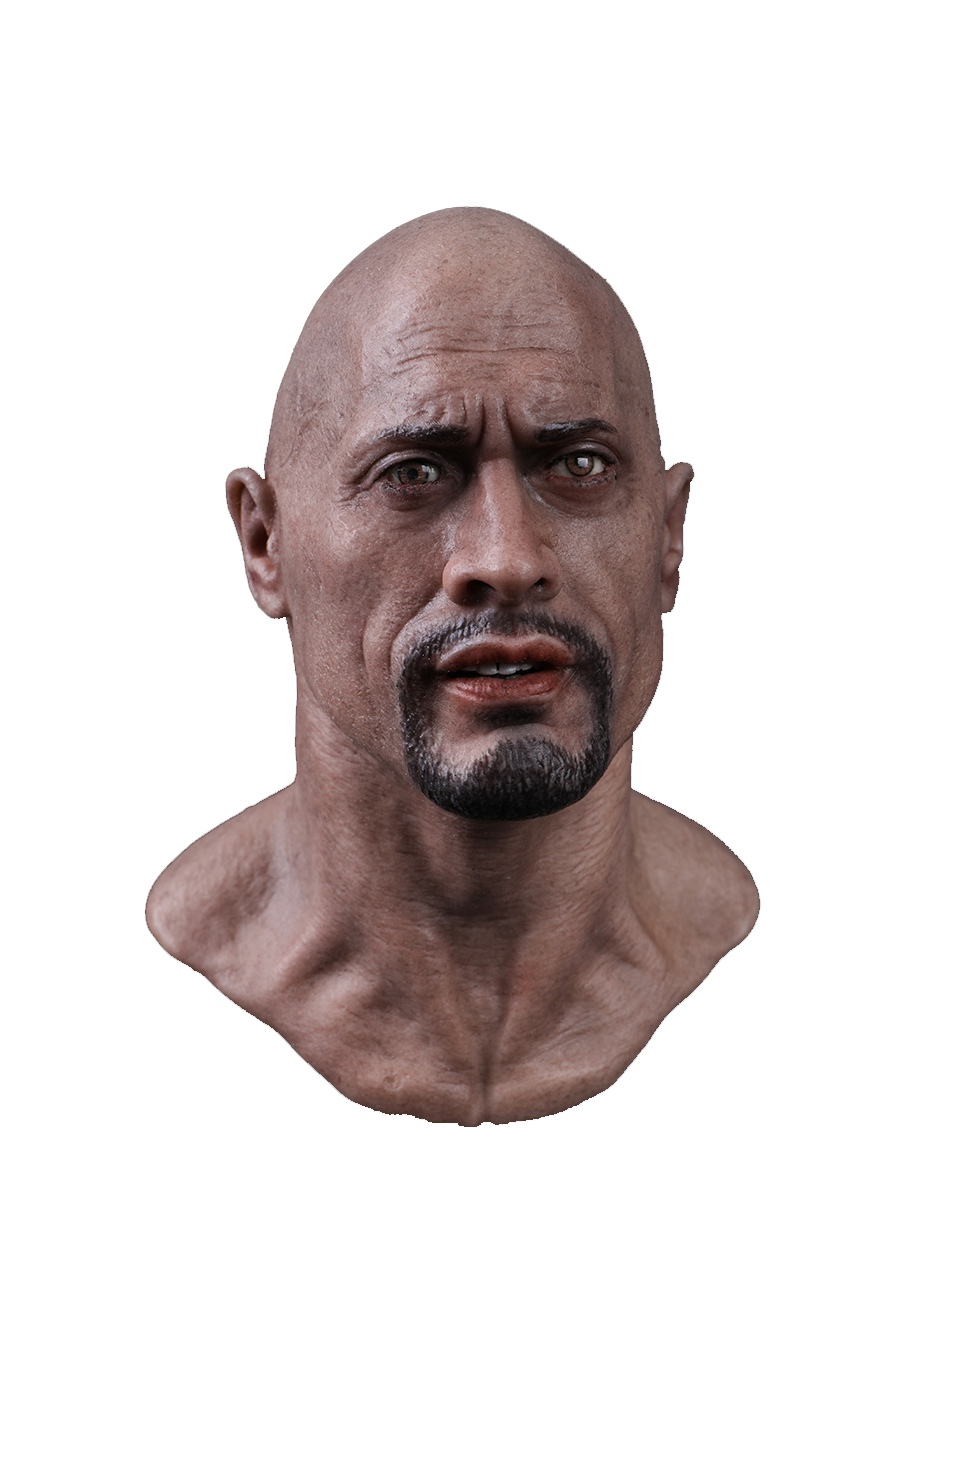 Silicone - NEW PRODUCT: COOMODEL & CHENTOYS: 1/6 full silicone figurative head carving #SG001 20070910